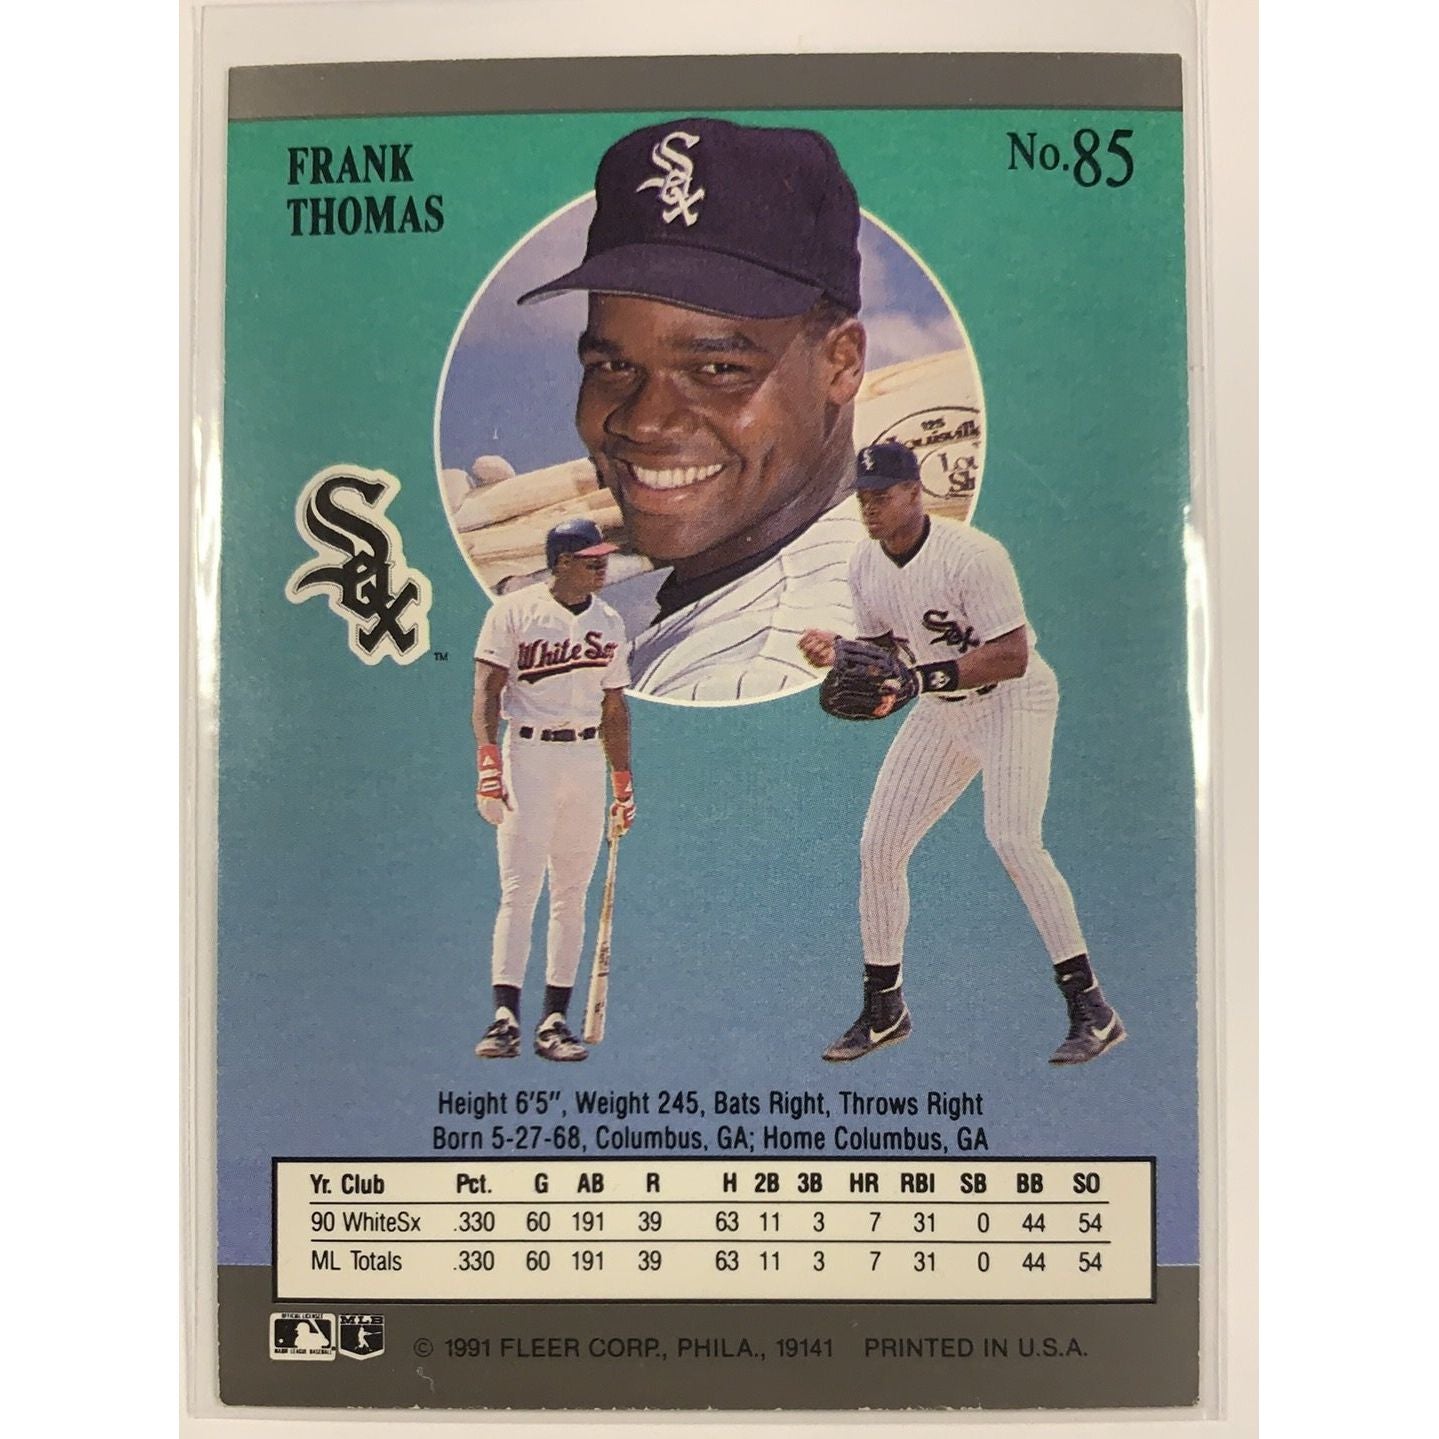  1991 Fleer Ultra Frank Thomas 2nd Year Card  Local Legends Cards & Collectibles